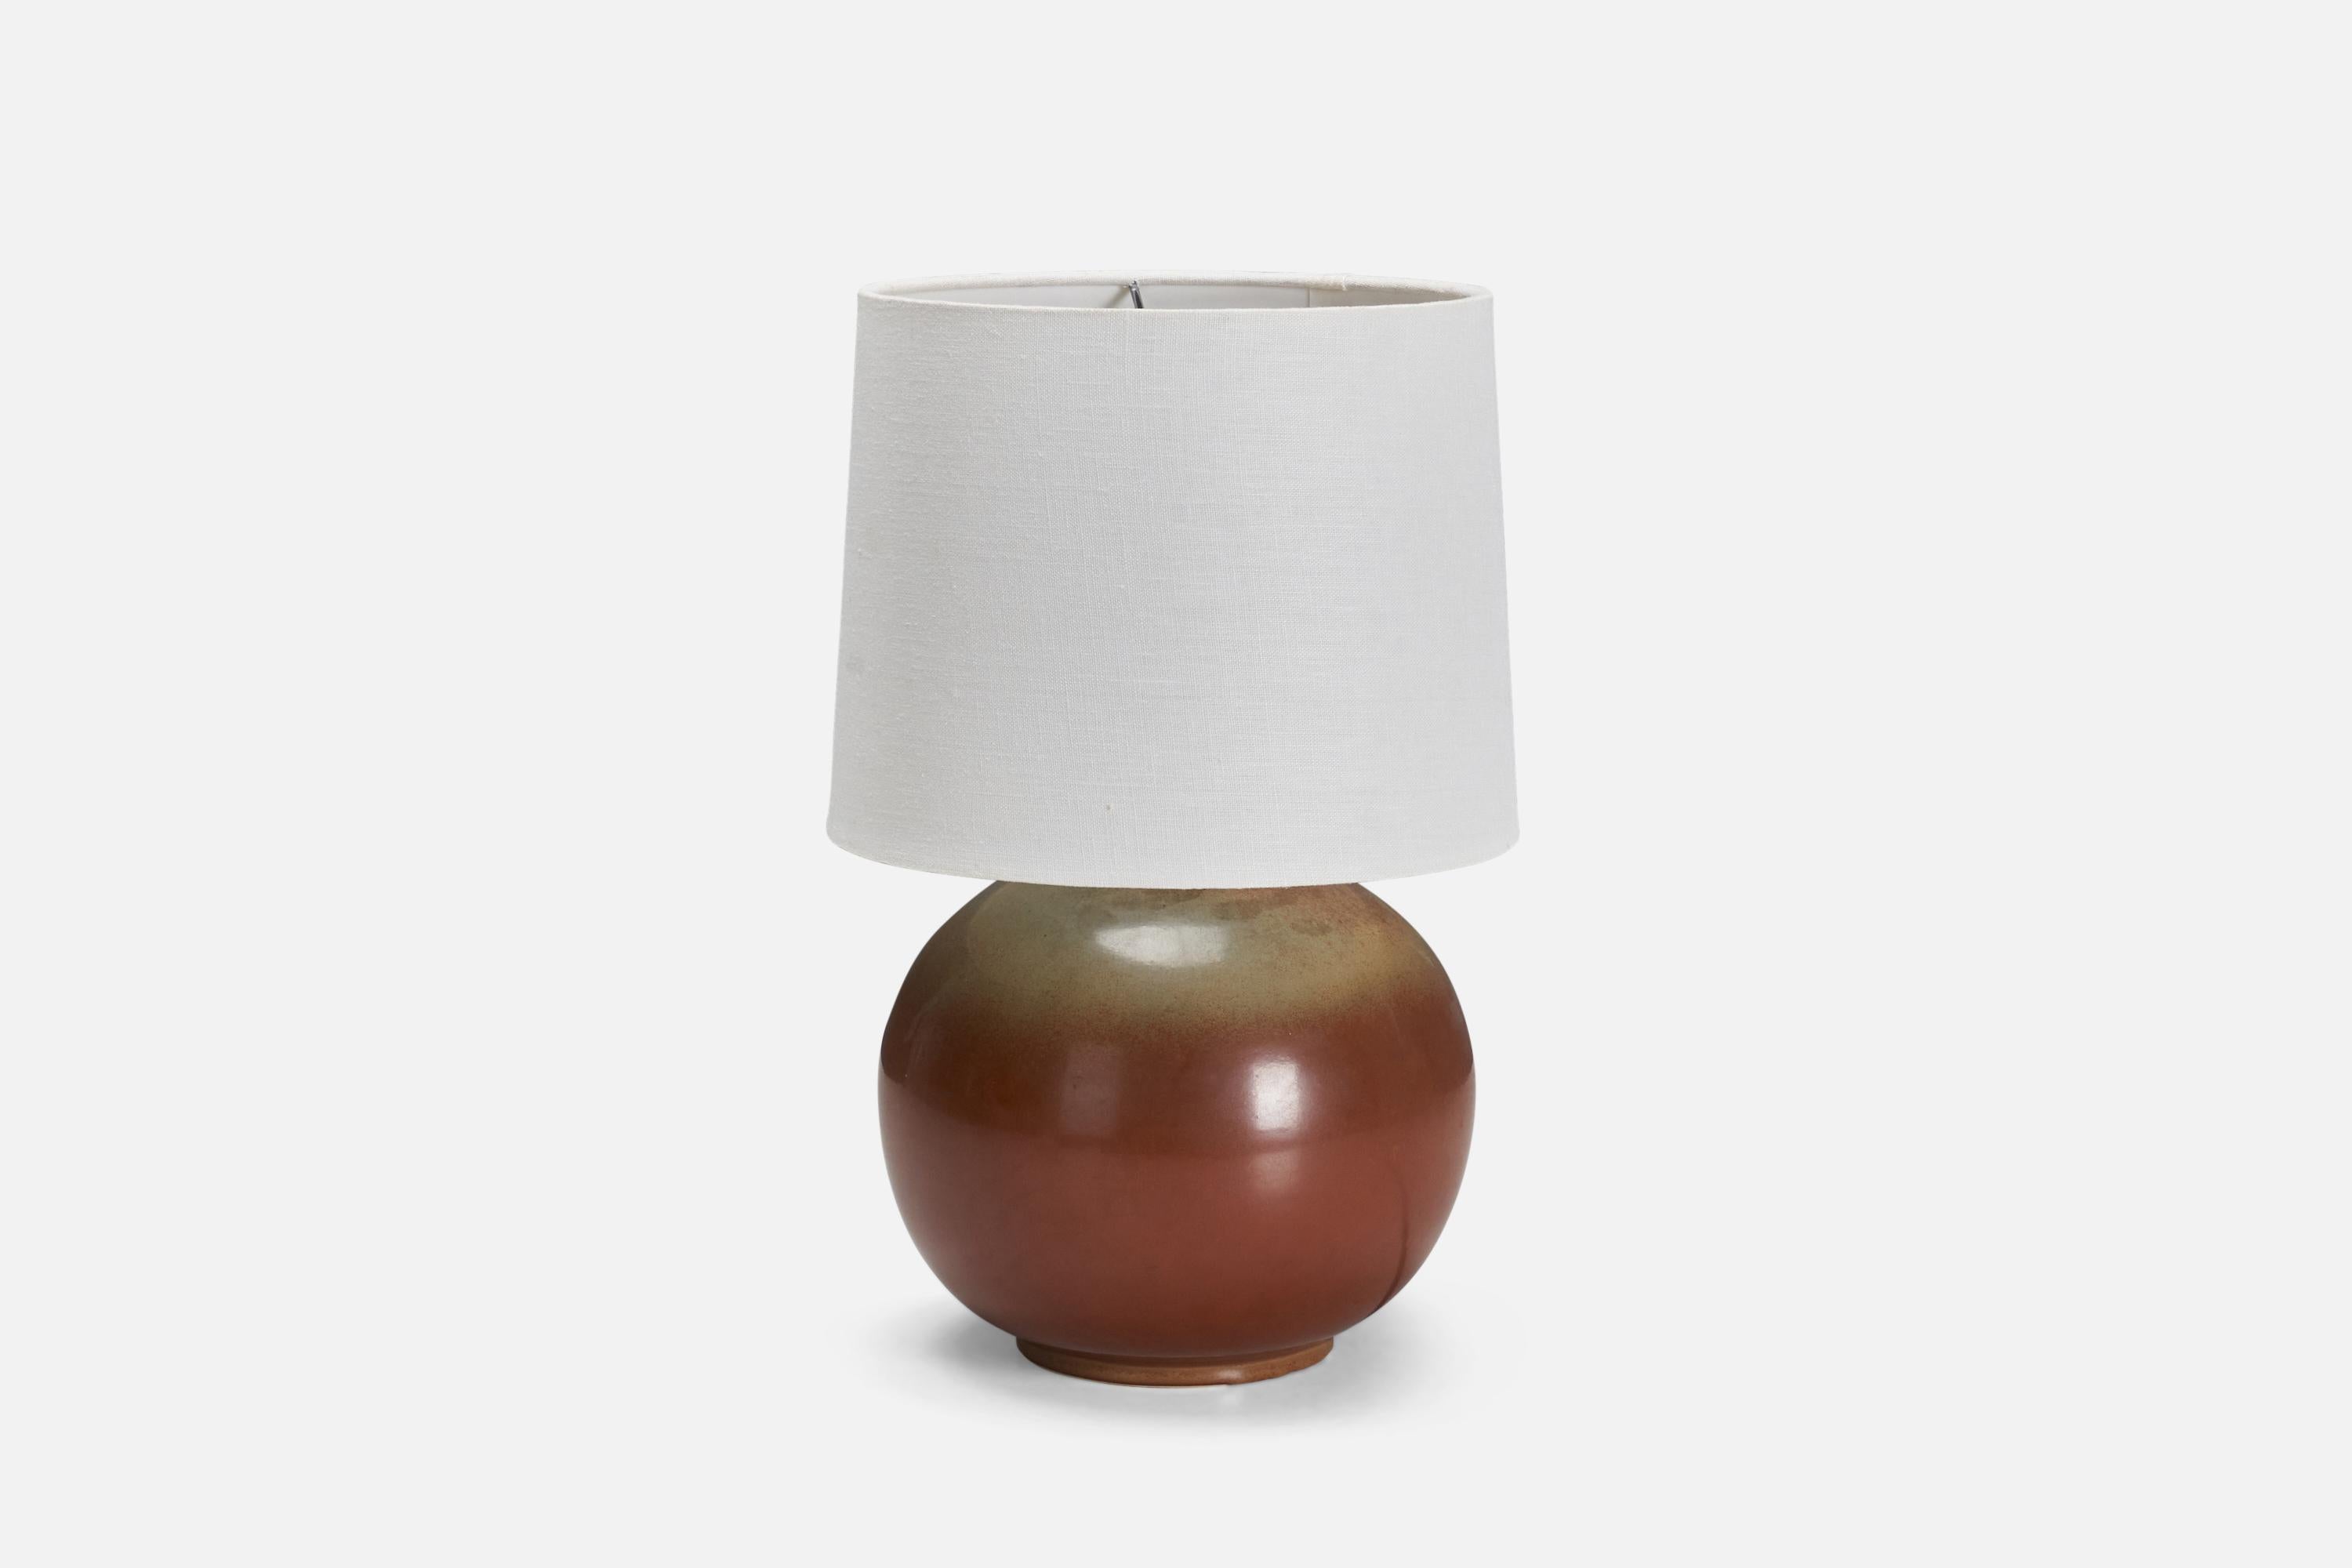 A sizable table lamp, model Nylund. Produced by Bing & Grøndahl, Denmark, 1940s. Features a vintage lampshade, possibly the original lampshade.

Glaze features orange-green colors.
